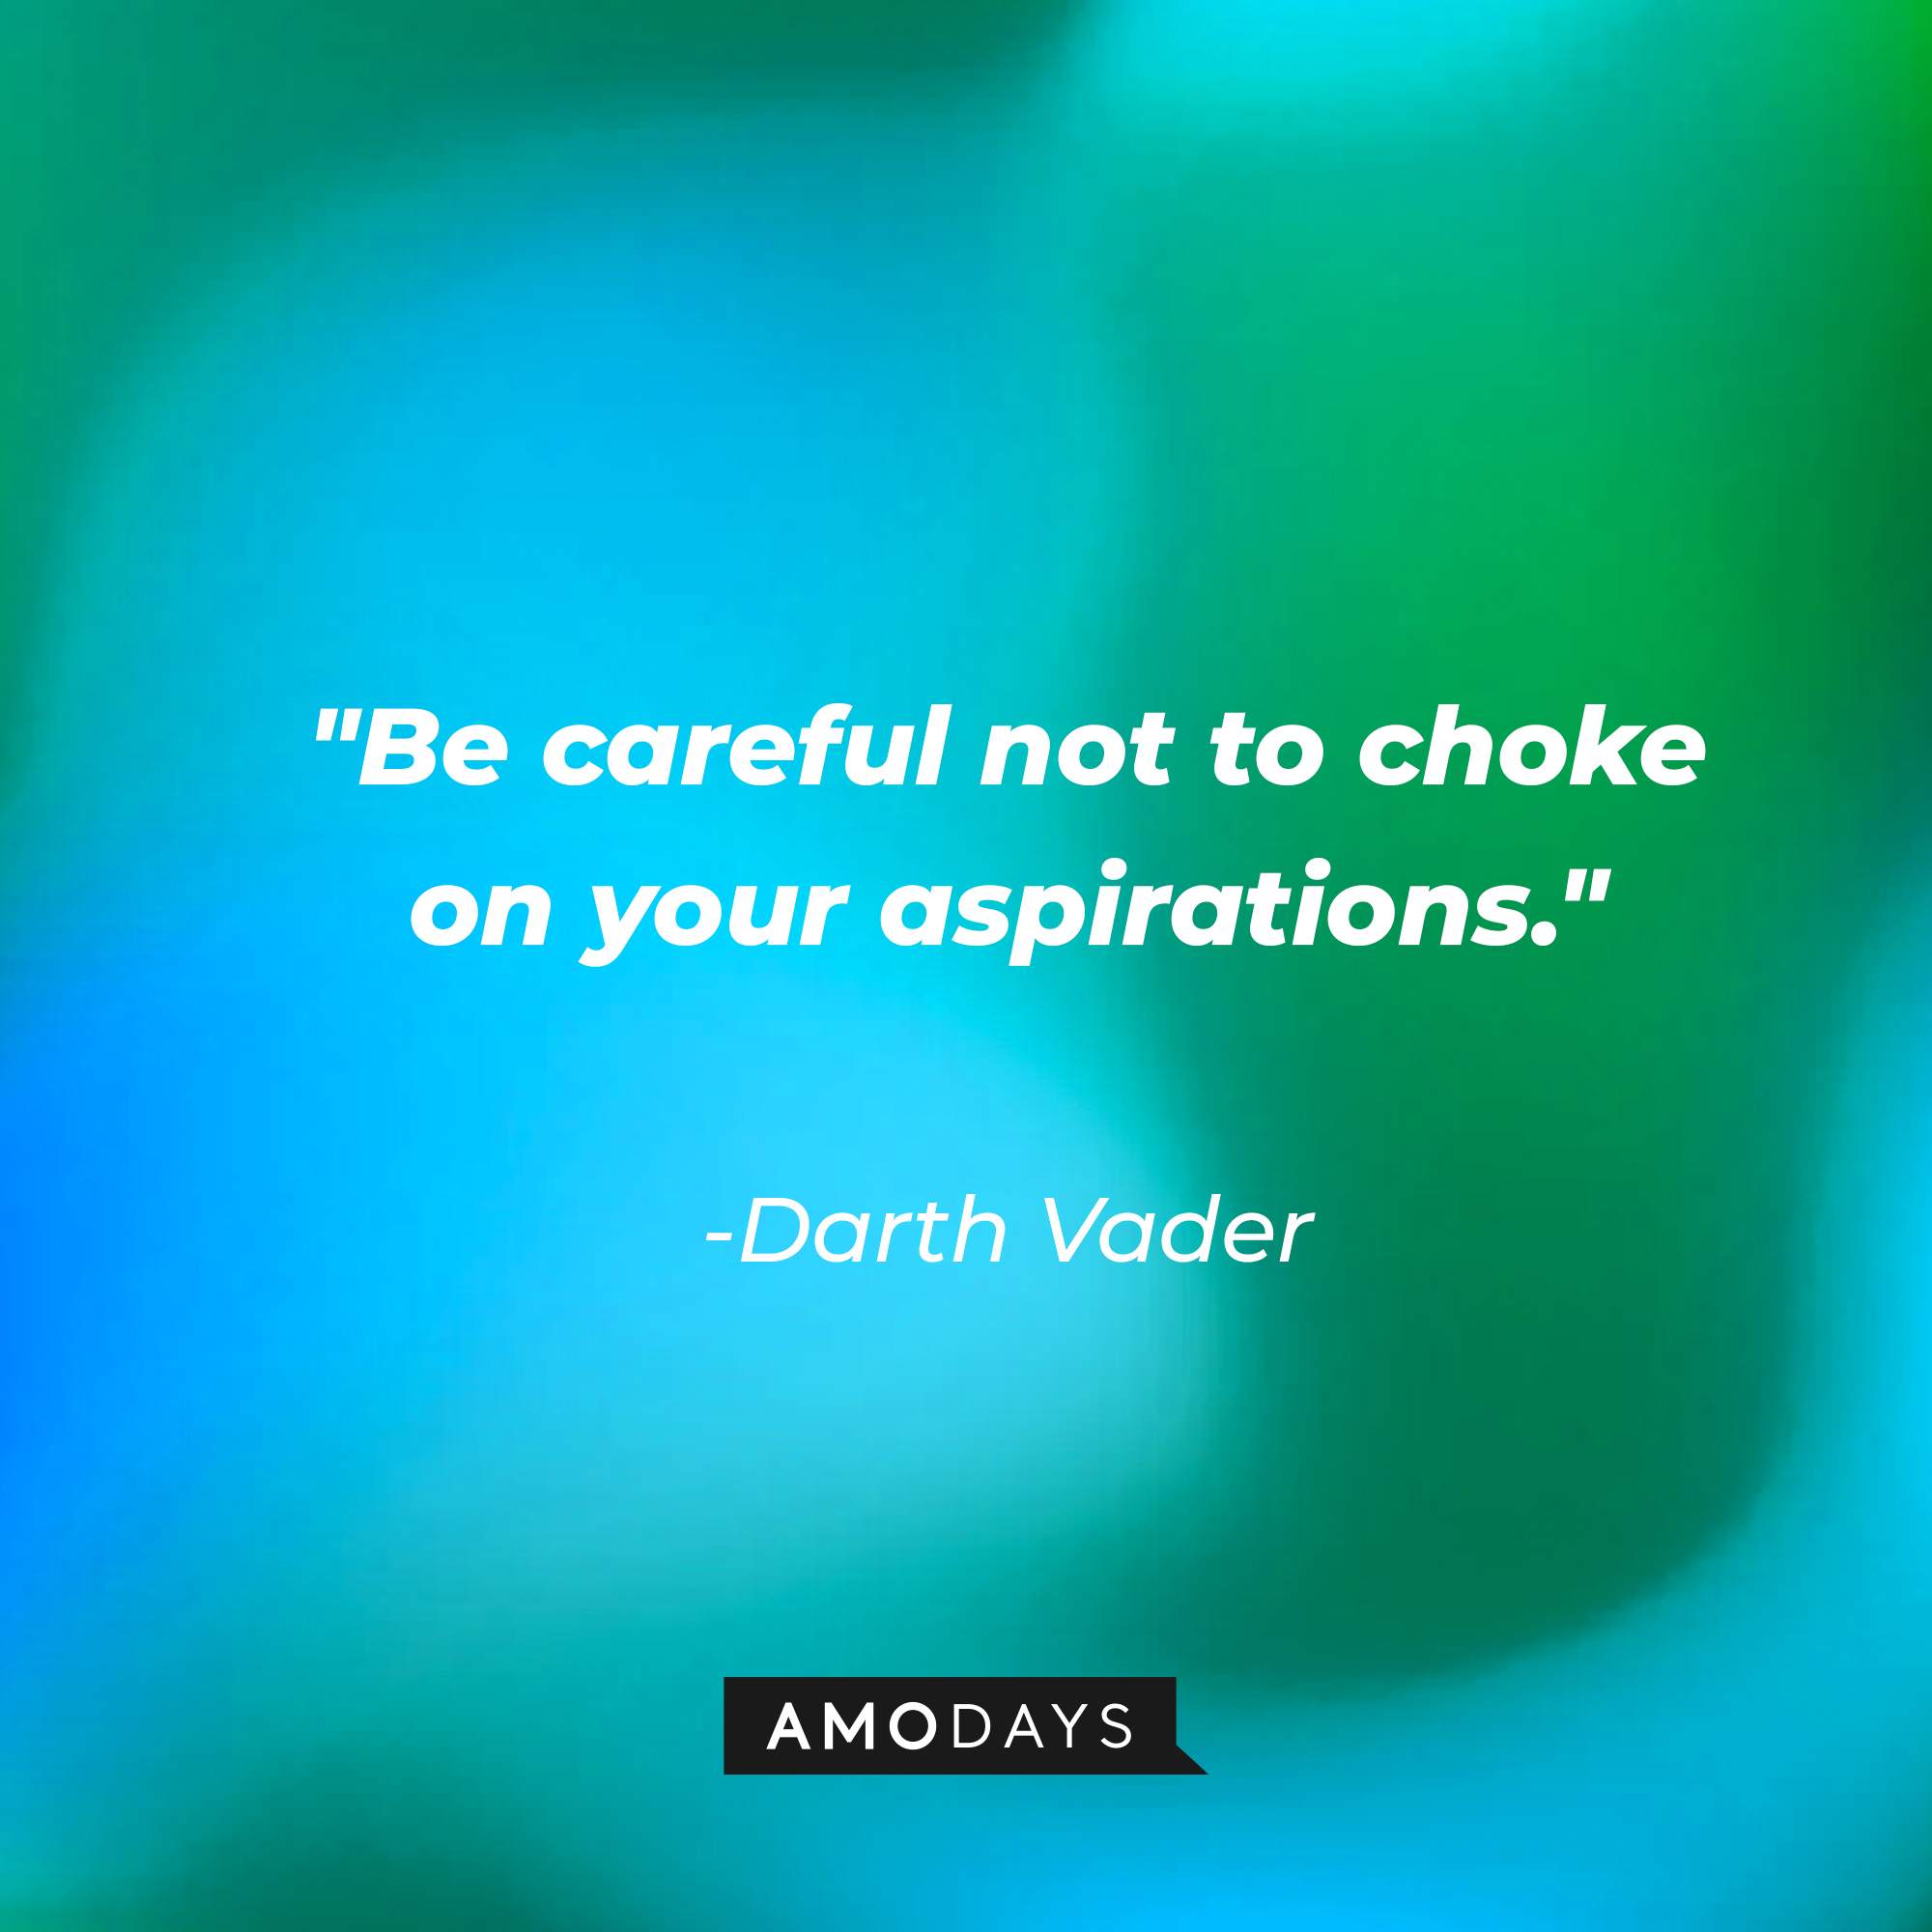 Darth Vader's quote: “Be careful not to choke on your aspirations." | Source: Amodays